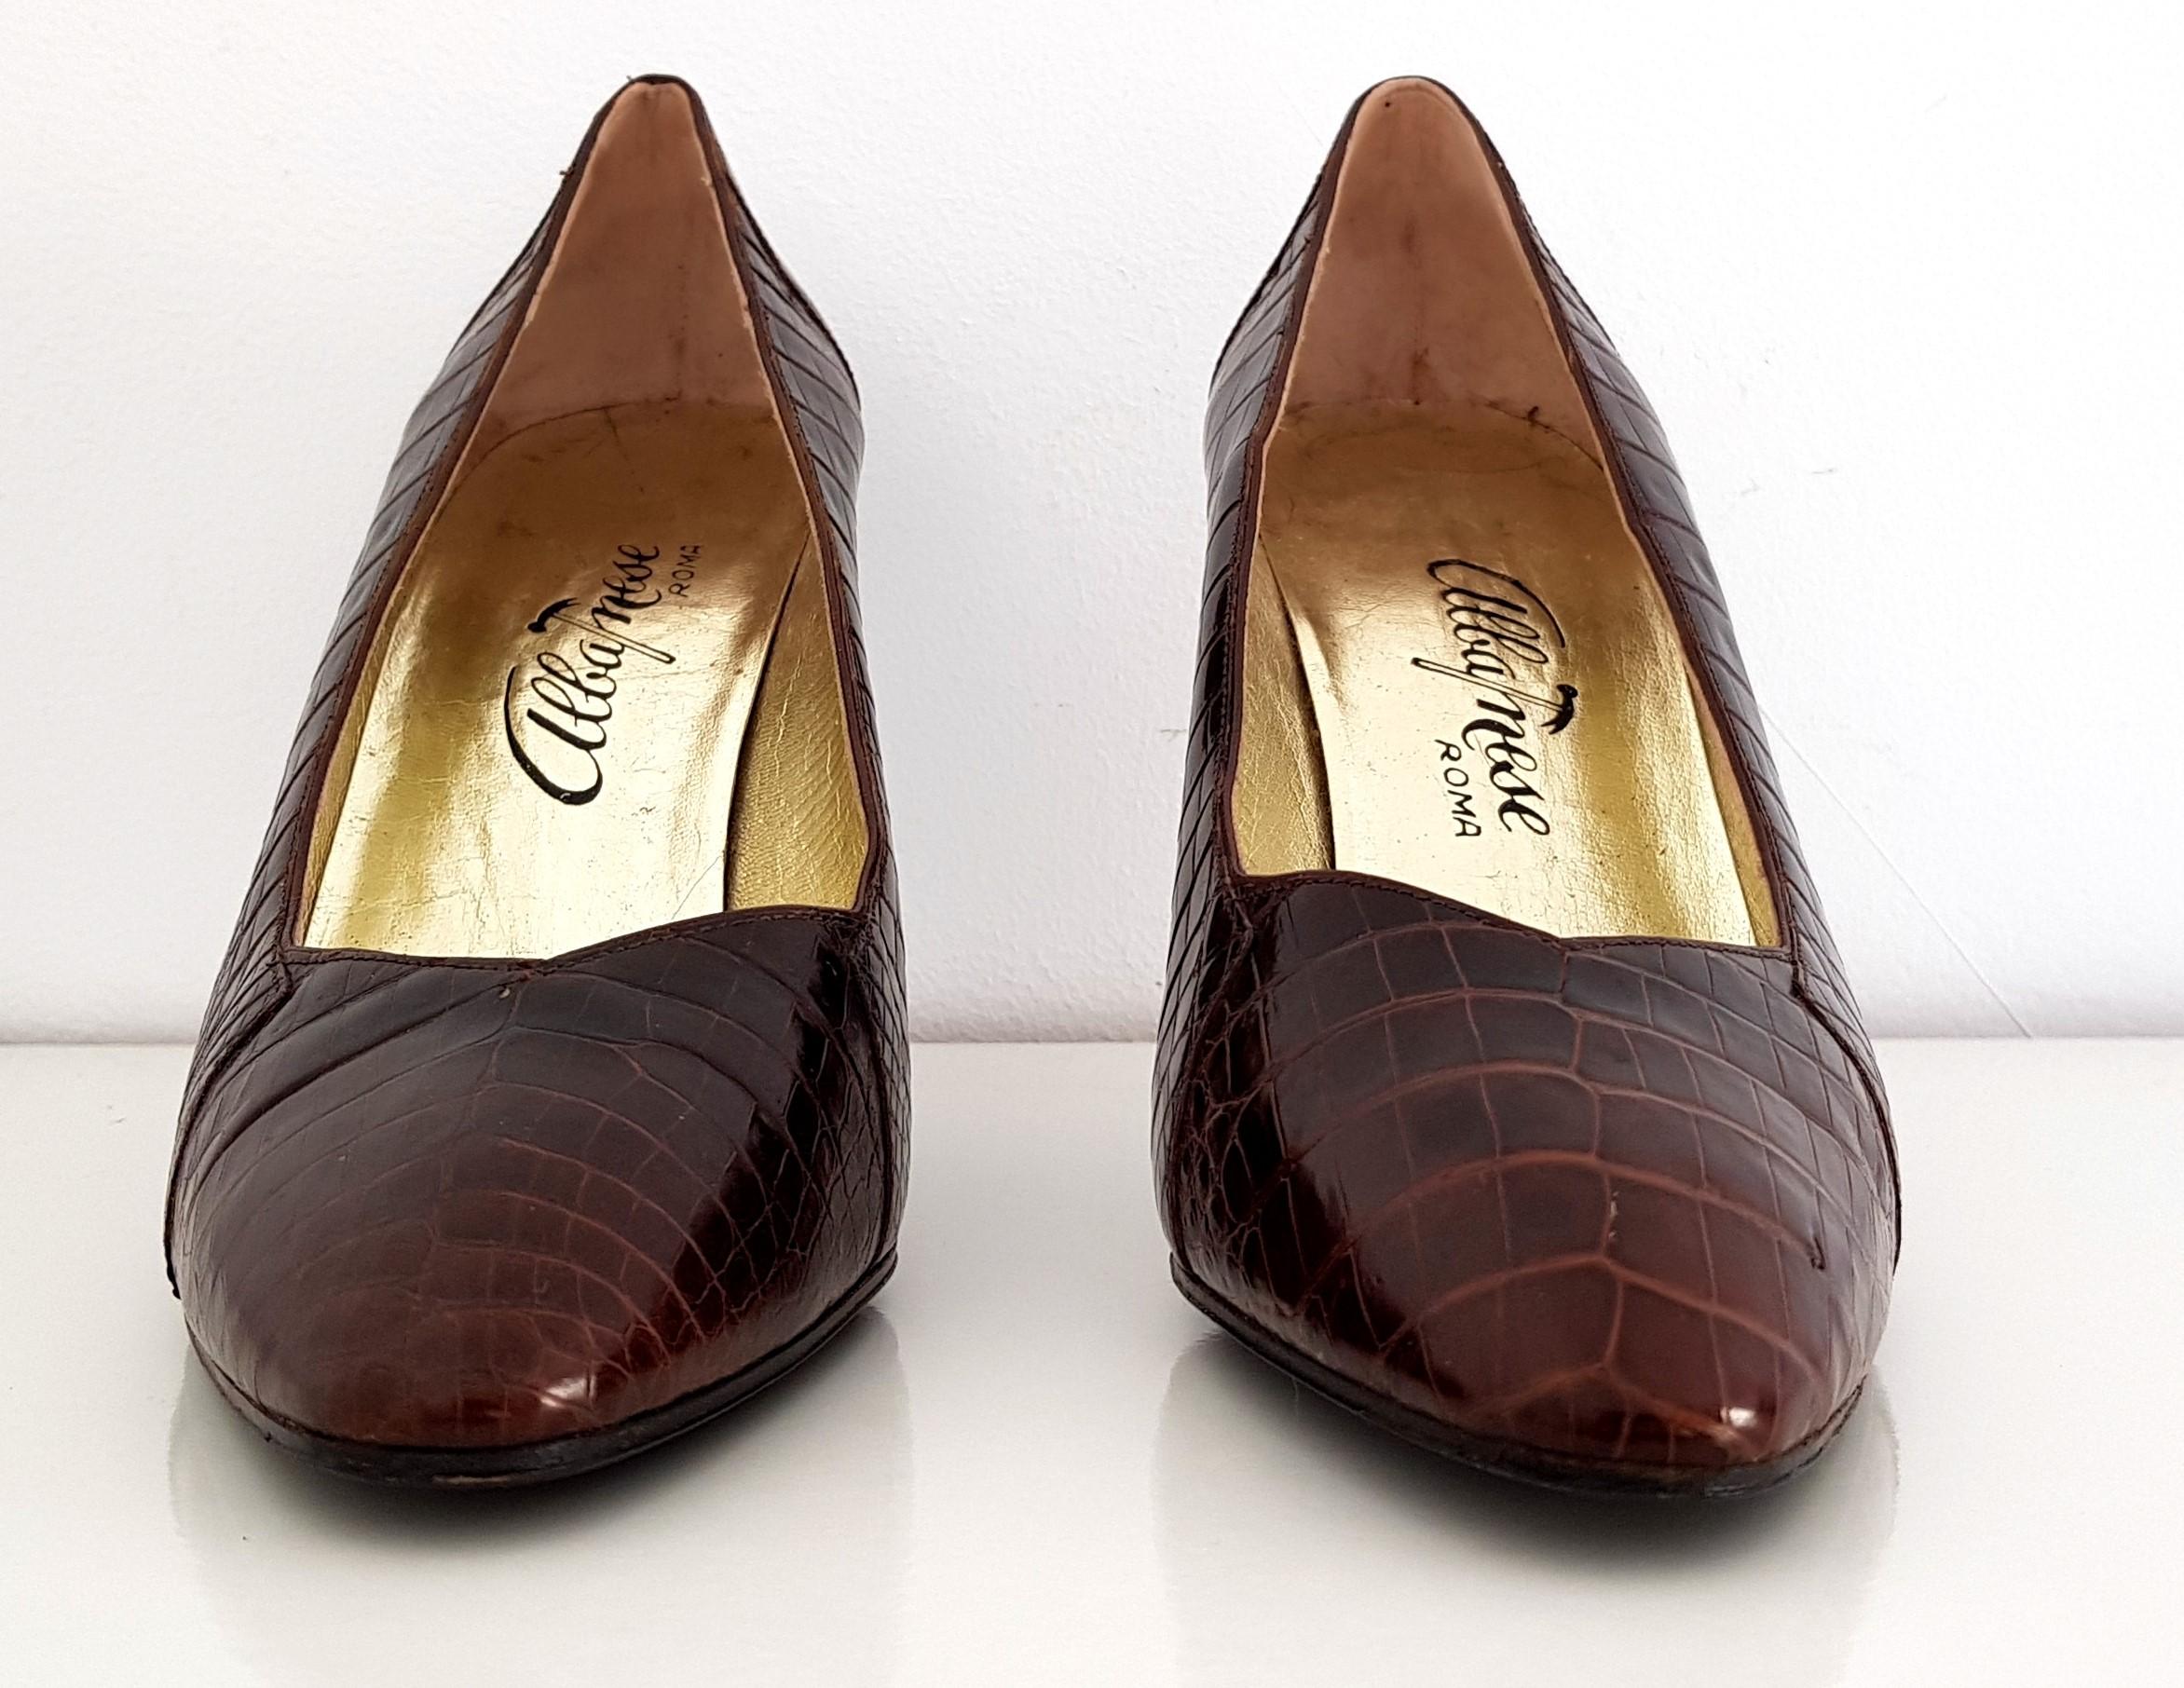 Enzo Albanese Heels.
Crocodile Leather 
Color: Brown 
Conditions: Excellent conditions, practically new. 
Heel height: 9 cm
Size 40 (EU)
Made in italy